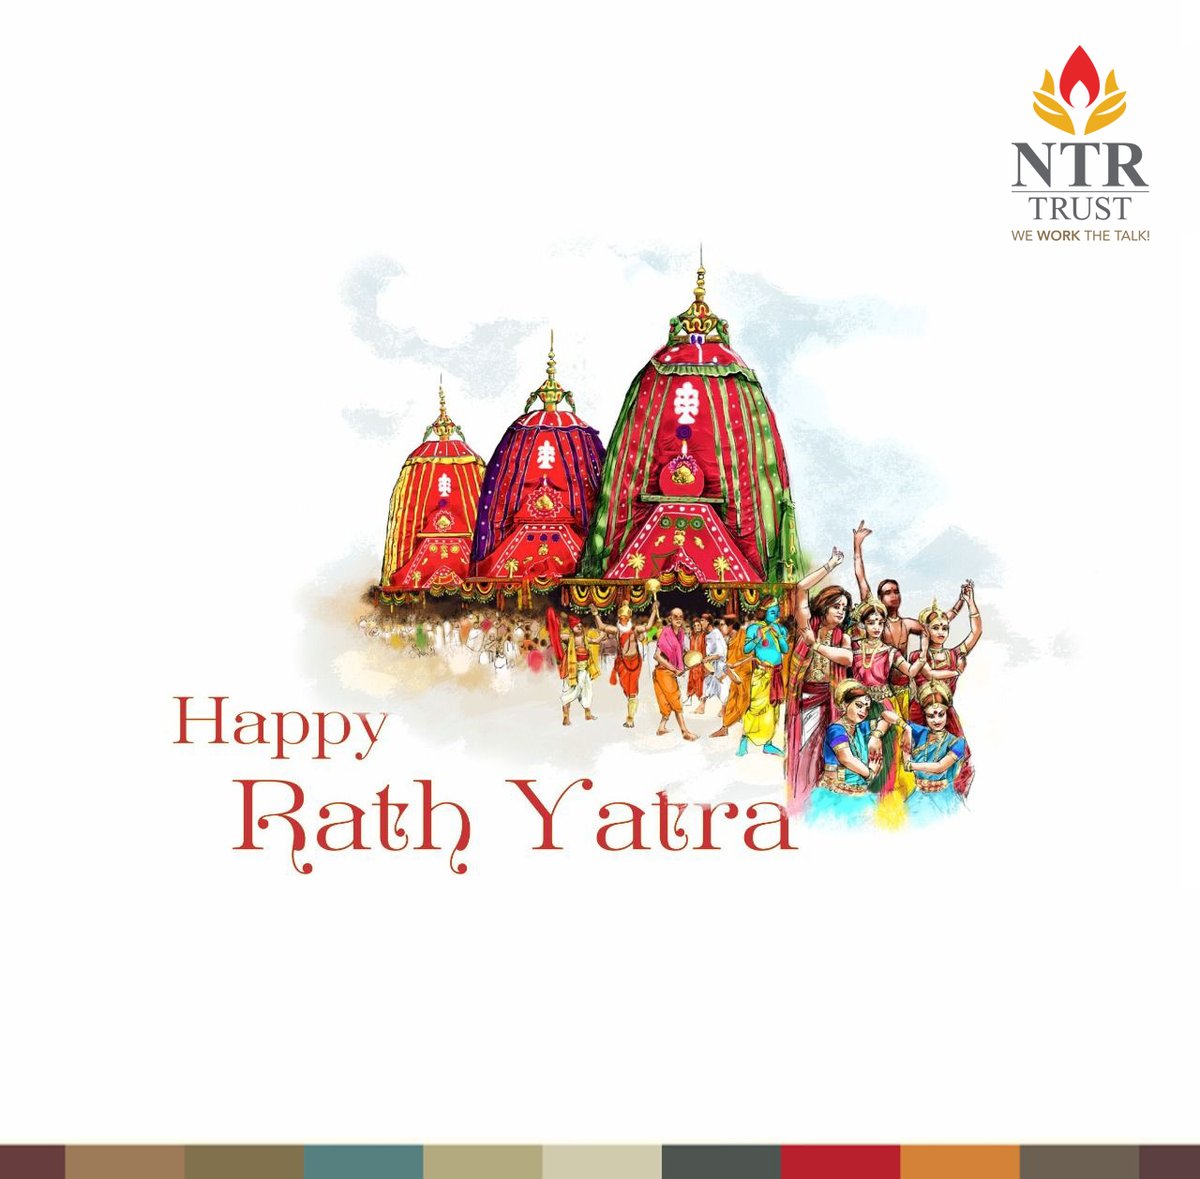 Wishes you a very Happy and Prosperous Rath Yatra.

#Rathyatra #RathyatraFestival